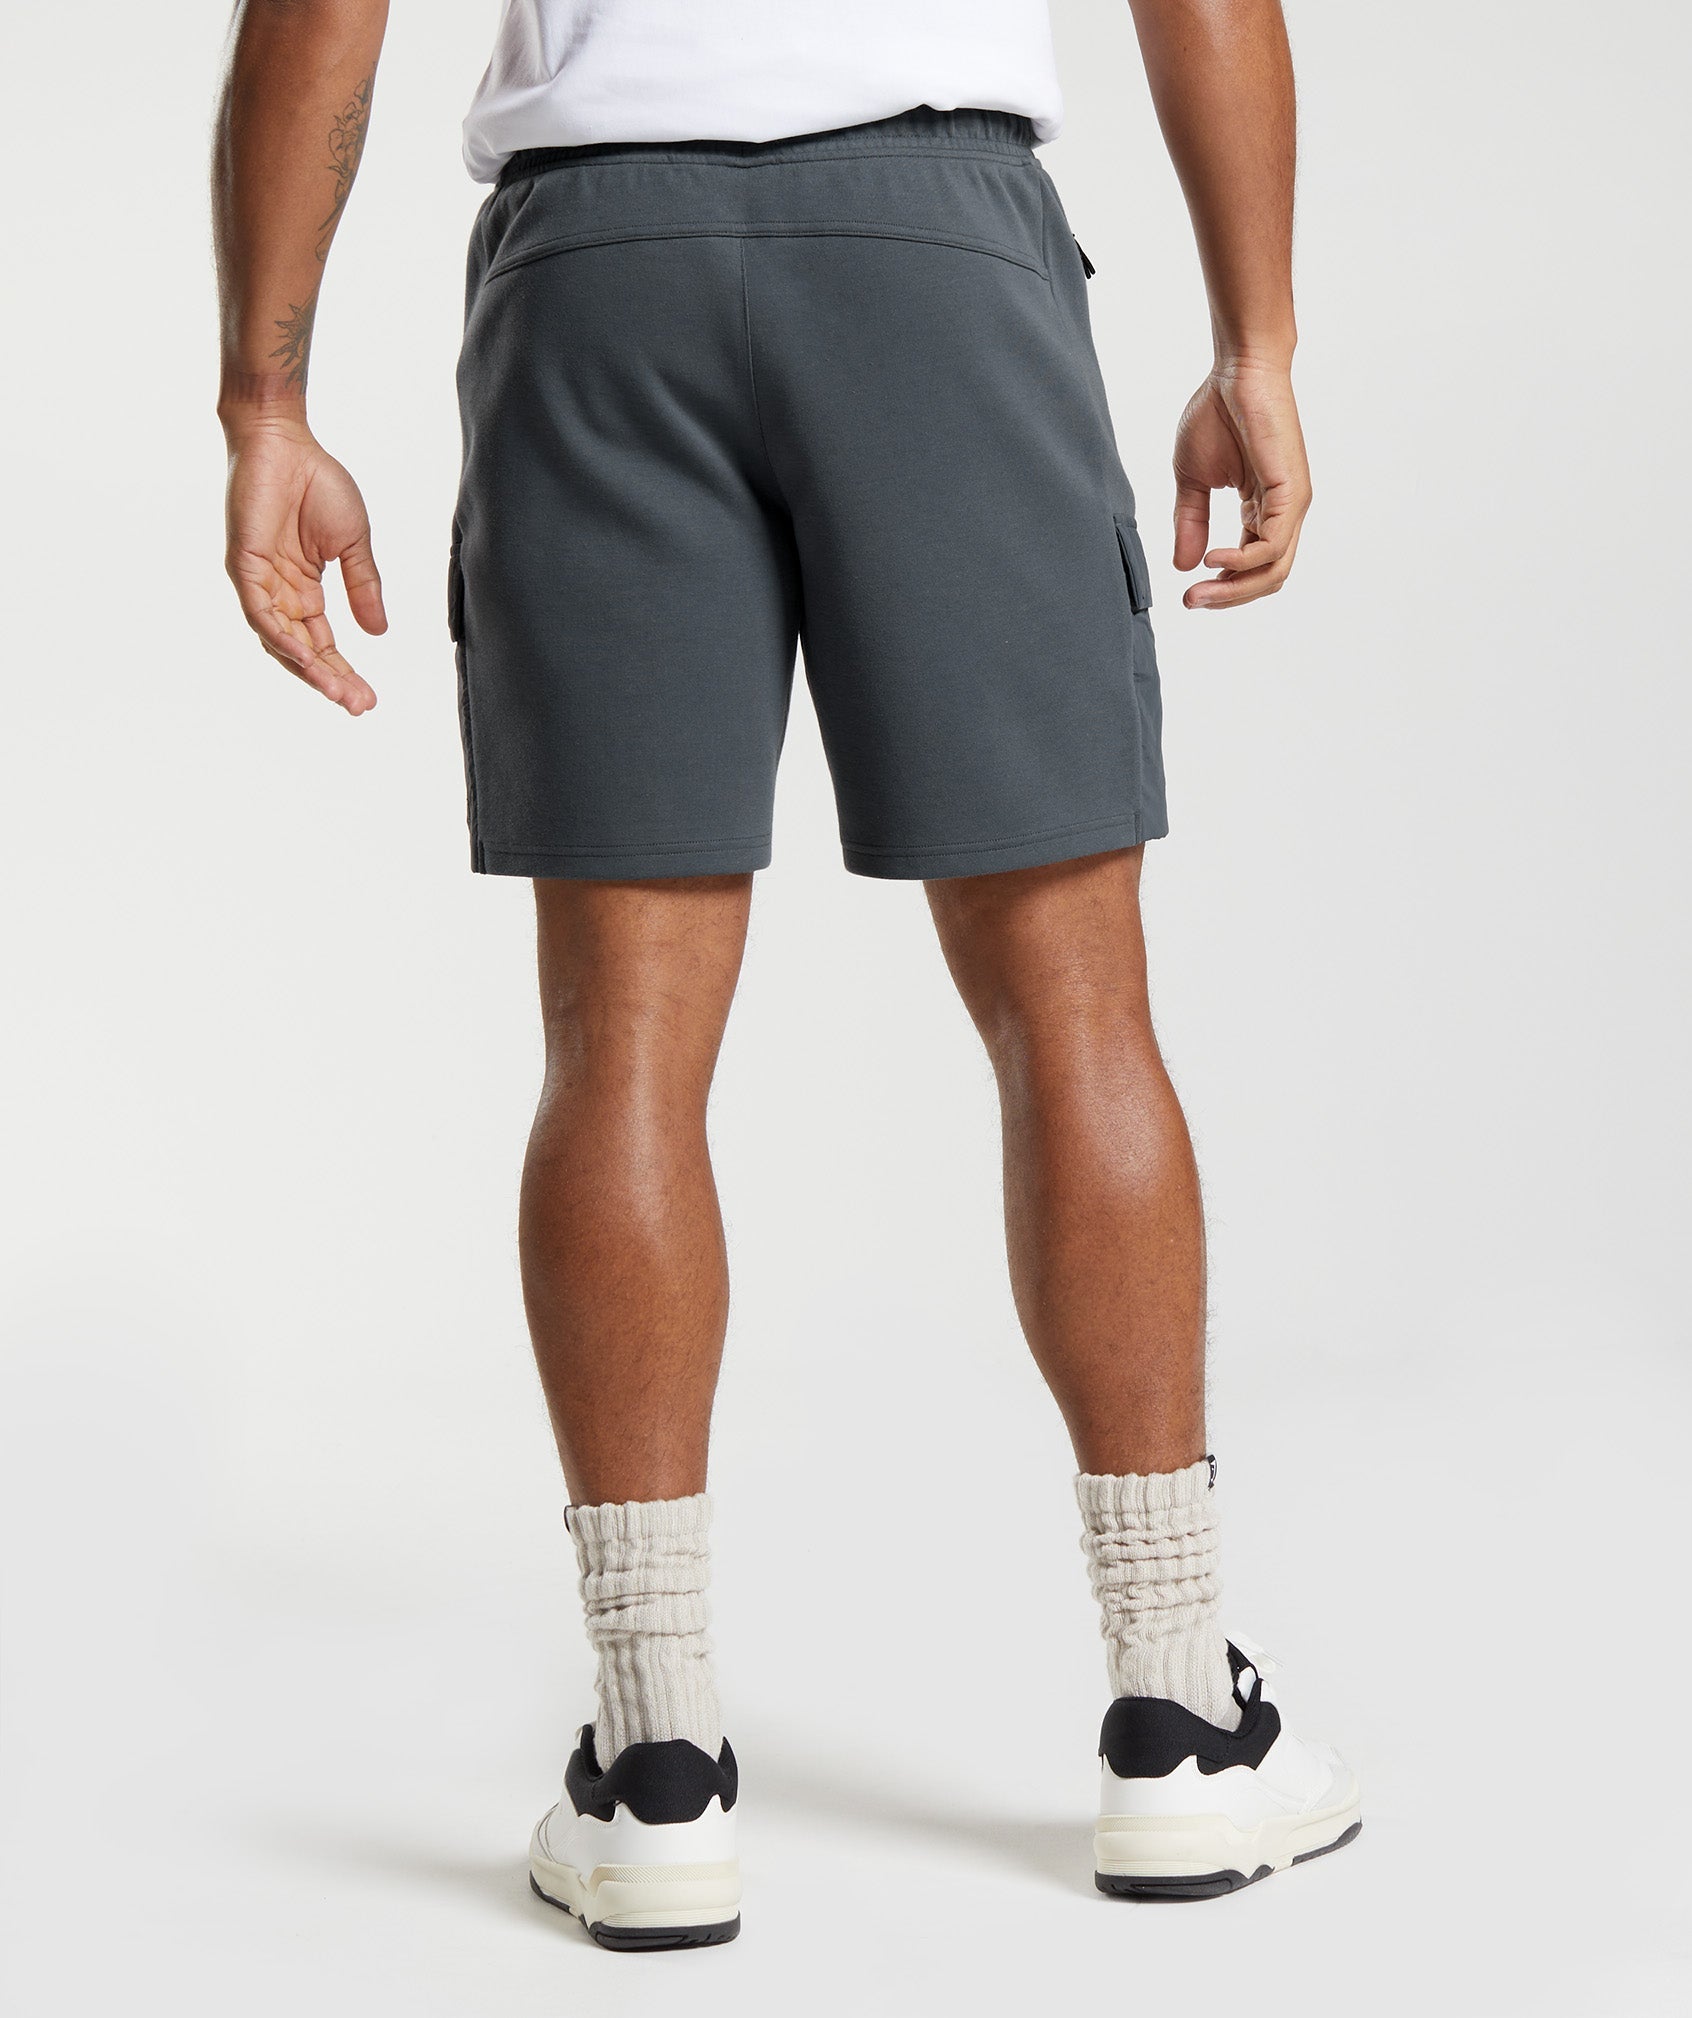 Rest Day Commute Shorts in Cosmic Grey - view 2